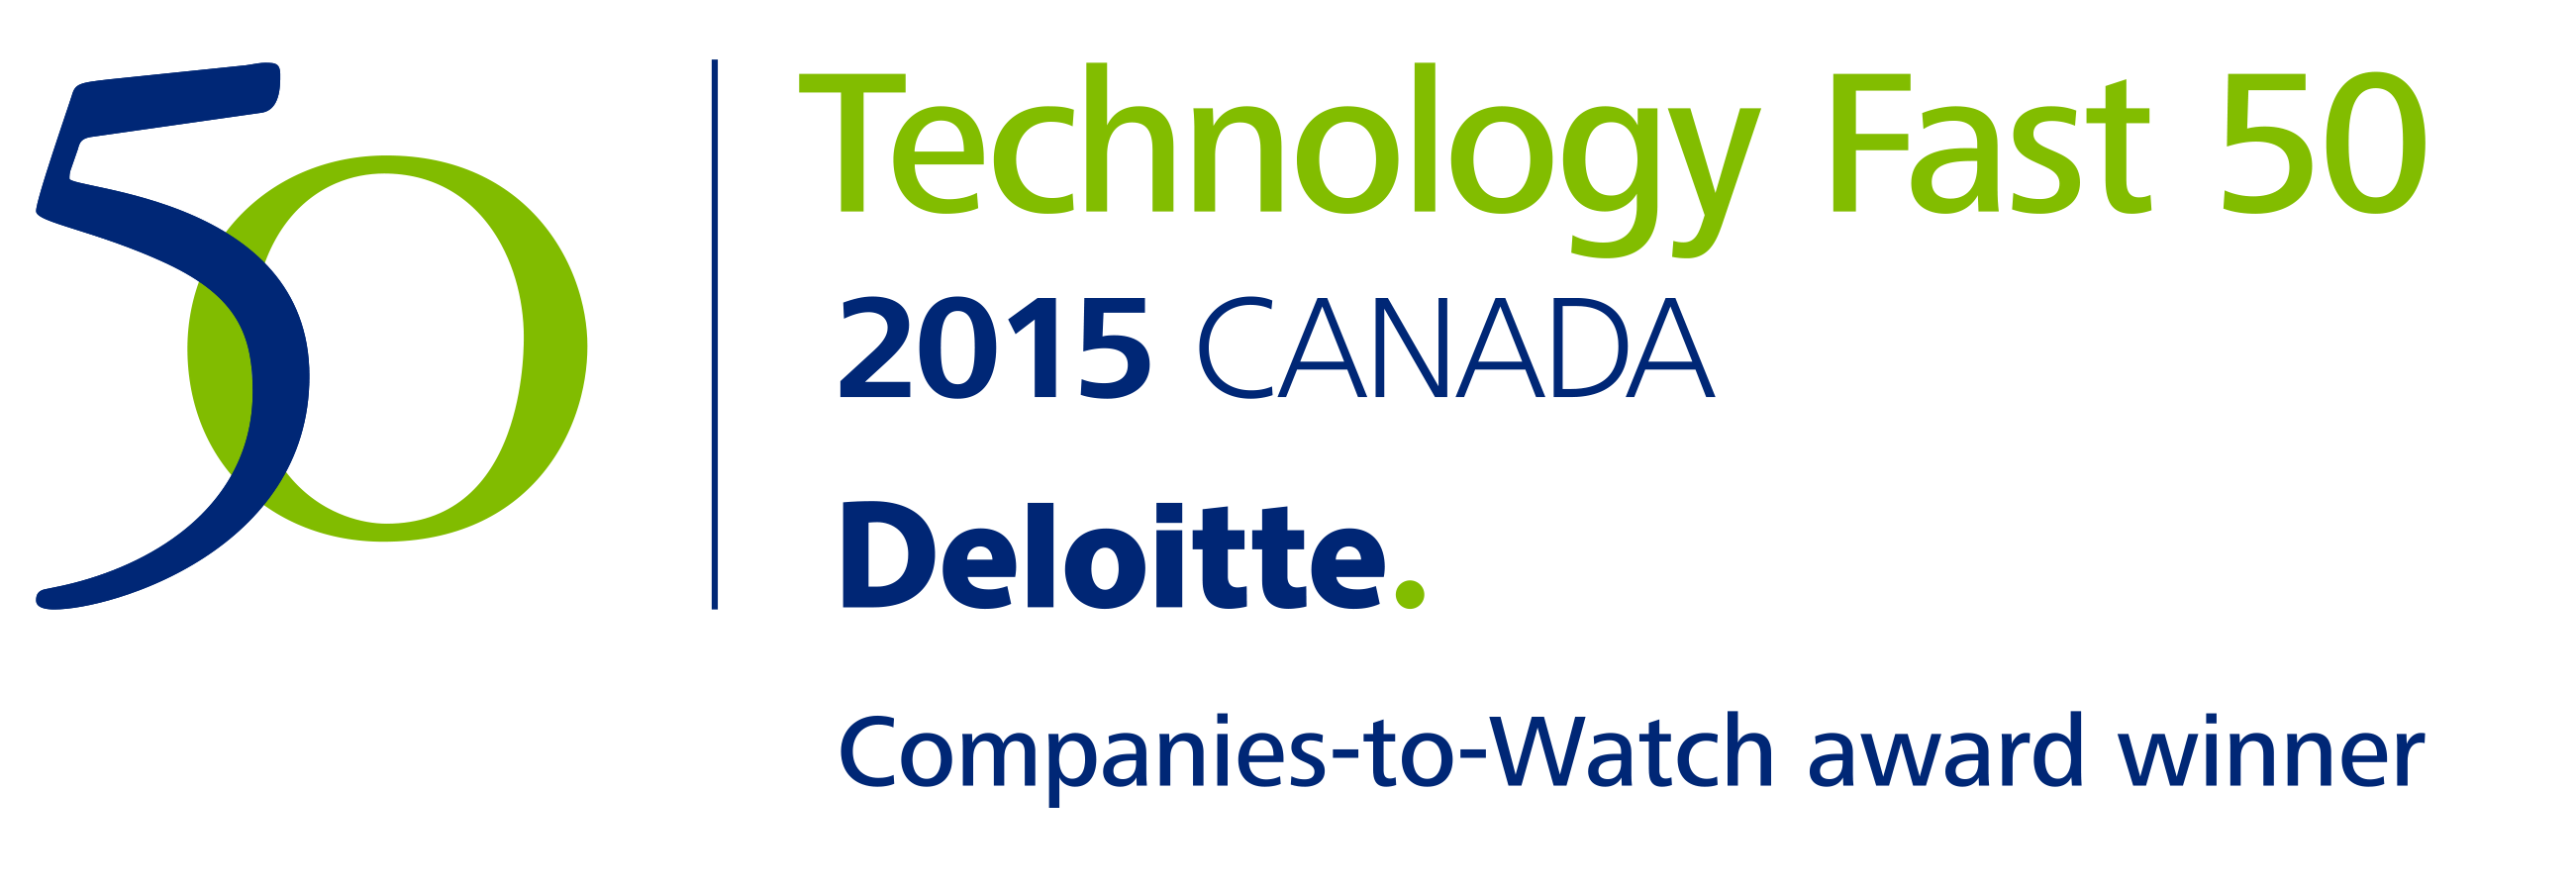 TrustPoint Named One of Canada's Companies to Watch in the 2015 Deloitte Technology Fast 50 Awards